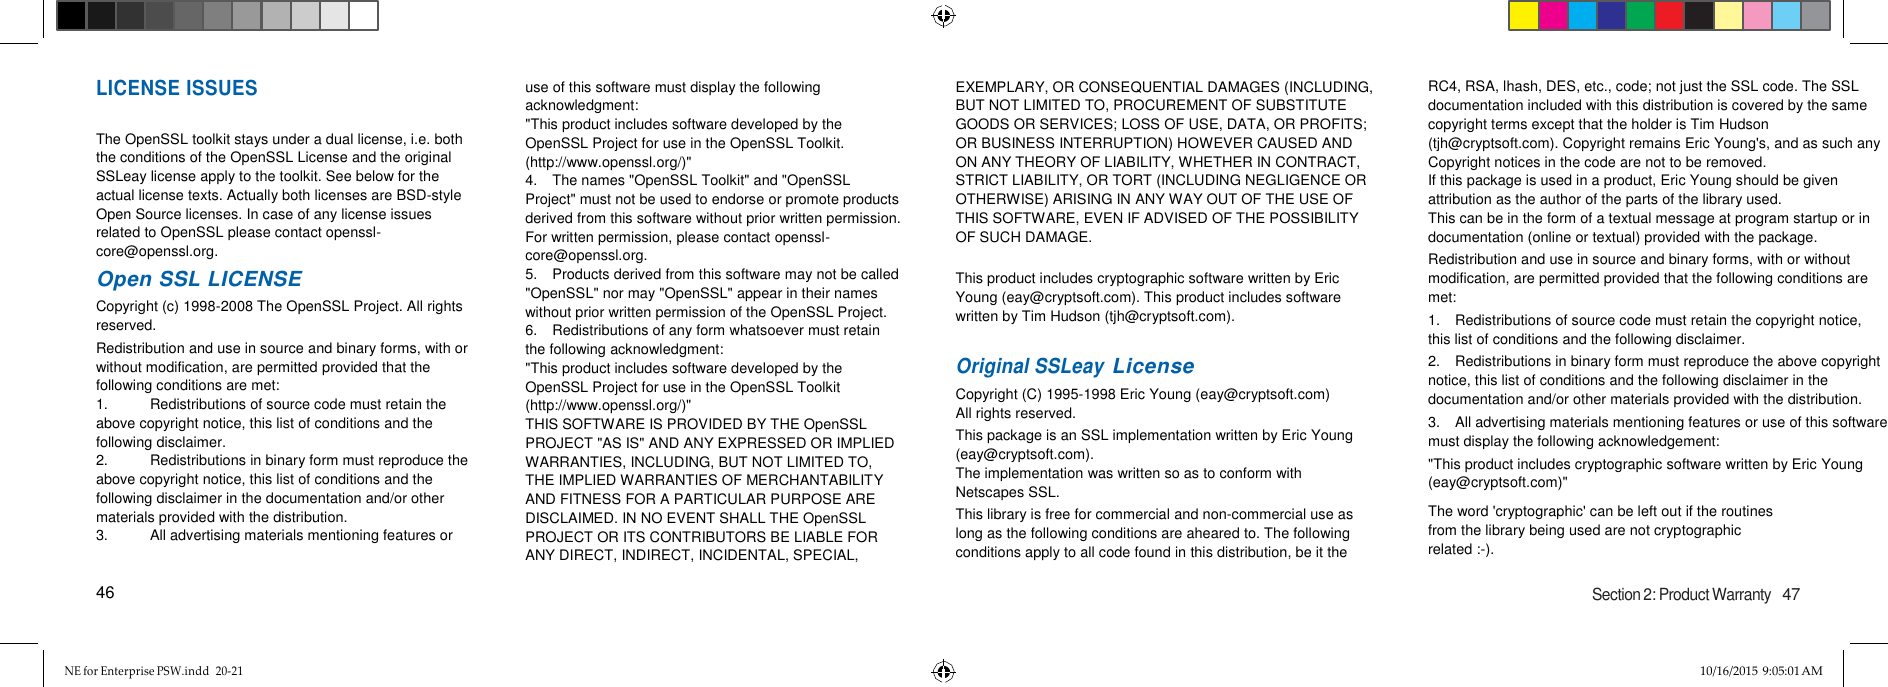 NE for Enterprise PSW.indd  20-21 10/16/2015 9:05:01 AM   LICENSE ISSUES  The OpenSSL toolkit stays under a dual license, i.e. both the conditions of the OpenSSL License and the original SSLeay license apply to the toolkit. See below for the actual license texts. Actually both licenses are BSD-style Open Source licenses. In case of any license issues related to OpenSSL please contact openssl-core@openssl.org. Open SSL LICENSE Copyright (c) 1998-2008 The OpenSSL Project. All rights reserved. Redistribution and use in source and binary forms, with or without modification, are permitted provided that the following conditions are met: 1.  Redistributions of source code must retain the above copyright notice, this list of conditions and the following disclaimer. 2.  Redistributions in binary form must reproduce the above copyright notice, this list of conditions and the following disclaimer in the documentation and/or other materials provided with the distribution. 3.  All advertising materials mentioning features or  46 use of this software must display the following acknowledgment: &quot;This product includes software developed by the OpenSSL Project for use in the OpenSSL Toolkit. (http://www.openssl.org/)&quot; 4.  The names &quot;OpenSSL Toolkit&quot; and &quot;OpenSSL Project&quot; must not be used to endorse or promote products derived from this software without prior written permission. For written permission, please contact openssl-core@openssl.org. 5.  Products derived from this software may not be called &quot;OpenSSL&quot; nor may &quot;OpenSSL&quot; appear in their names without prior written permission of the OpenSSL Project. 6.  Redistributions of any form whatsoever must retain the following acknowledgment: &quot;This product includes software developed by the OpenSSL Project for use in the OpenSSL Toolkit (http://www.openssl.org/)&quot; THIS SOFTWARE IS PROVIDED BY THE OpenSSL PROJECT &quot;AS IS&quot; AND ANY EXPRESSED OR IMPLIED WARRANTIES, INCLUDING, BUT NOT LIMITED TO, THE IMPLIED WARRANTIES OF MERCHANTABILITY AND FITNESS FOR A PARTICULAR PURPOSE ARE  DISCLAIMED. IN NO EVENT SHALL THE OpenSSL PROJECT OR ITS CONTRIBUTORS BE LIABLE FOR ANY DIRECT, INDIRECT, INCIDENTAL, SPECIAL,   EXEMPLARY, OR CONSEQUENTIAL DAMAGES (INCLUDING, BUT NOT LIMITED TO, PROCUREMENT OF SUBSTITUTE GOODS OR SERVICES; LOSS OF USE, DATA, OR PROFITS; OR BUSINESS INTERRUPTION) HOWEVER CAUSED AND ON ANY THEORY OF LIABILITY, WHETHER IN CONTRACT, STRICT LIABILITY, OR TORT (INCLUDING NEGLIGENCE OR OTHERWISE) ARISING IN ANY WAY OUT OF THE USE OF THIS SOFTWARE, EVEN IF ADVISED OF THE POSSIBILITY OF SUCH DAMAGE.  This product includes cryptographic software written by Eric Young (eay@cryptsoft.com). This product includes software written by Tim Hudson (tjh@cryptsoft.com).   Original SSLeay License Copyright (C) 1995-1998 Eric Young (eay@cryptsoft.com) All rights reserved. This package is an SSL implementation written by Eric Young (eay@cryptsoft.com). The implementation was written so as to conform with Netscapes SSL. This library is free for commercial and non-commercial use as long as the following conditions are aheared to. The following conditions apply to all code found in this distribution, be it the    RC4, RSA, lhash, DES, etc., code; not just the SSL code. The SSL documentation included with this distribution is covered by the same copyright terms except that the holder is Tim Hudson (tjh@cryptsoft.com). Copyright remains Eric Young&apos;s, and as such any Copyright notices in the code are not to be removed. If this package is used in a product, Eric Young should be given attribution as the author of the parts of the library used. This can be in the form of a textual message at program startup or in documentation (online or textual) provided with the package. Redistribution and use in source and binary forms, with or without modification, are permitted provided that the following conditions are met: 1.  Redistributions of source code must retain the copyright notice, this list of conditions and the following disclaimer. 2.  Redistributions in binary form must reproduce the above copyright notice, this list of conditions and the following disclaimer in the documentation and/or other materials provided with the distribution. 3.  All advertising materials mentioning features or use of this software must display the following acknowledgement: &quot;This product includes cryptographic software written by Eric Young (eay@cryptsoft.com)&quot; The word &apos;cryptographic&apos; can be left out if the routines from the library being used are not cryptographic related :-).  Section 2: Product Warranty   47 